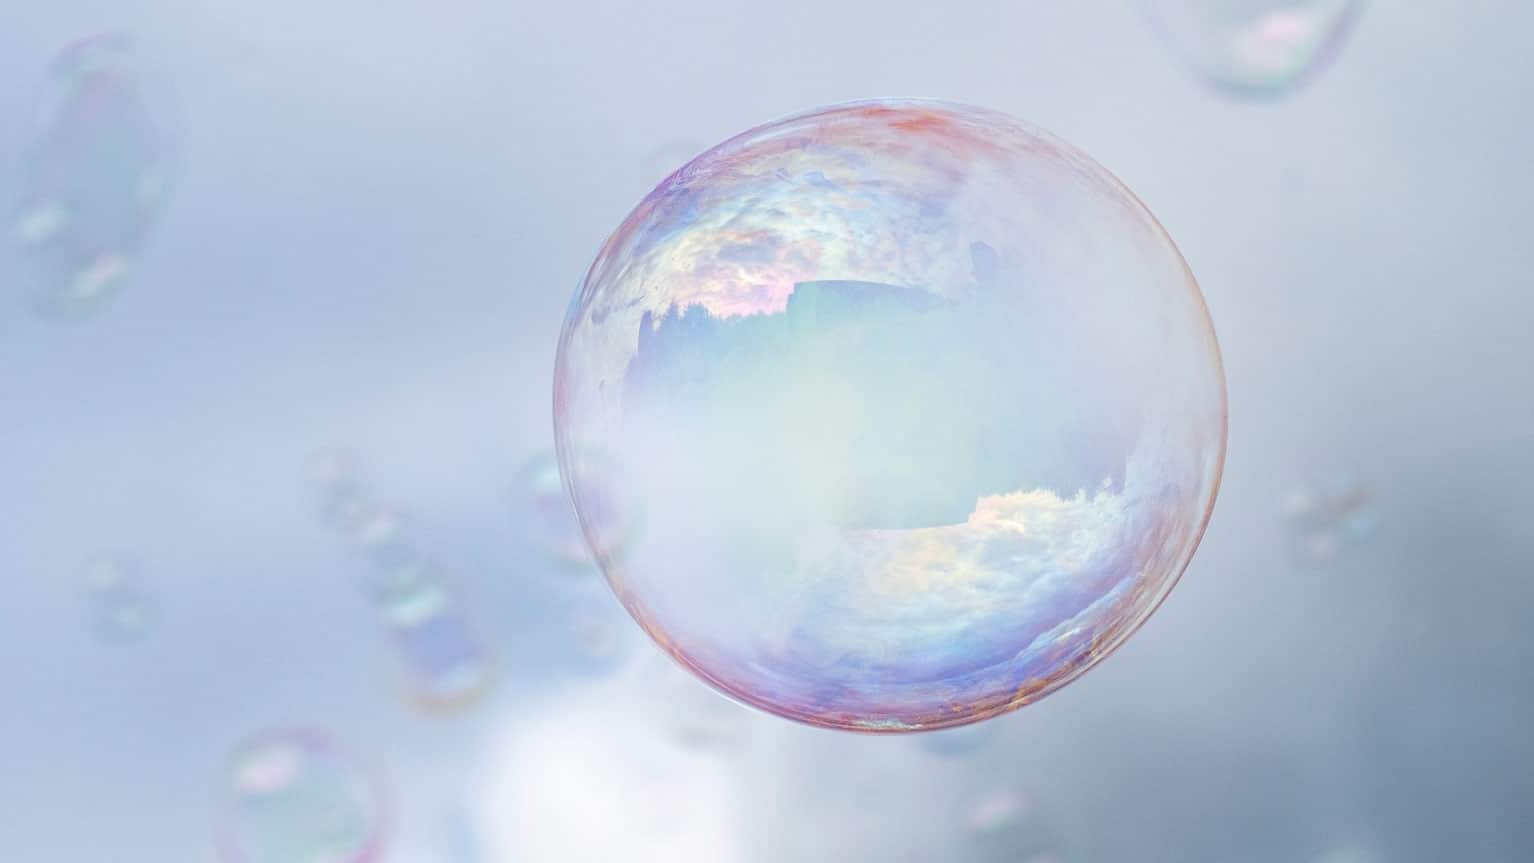 We've figured out why bubbles make a 'pop' sound when they burst